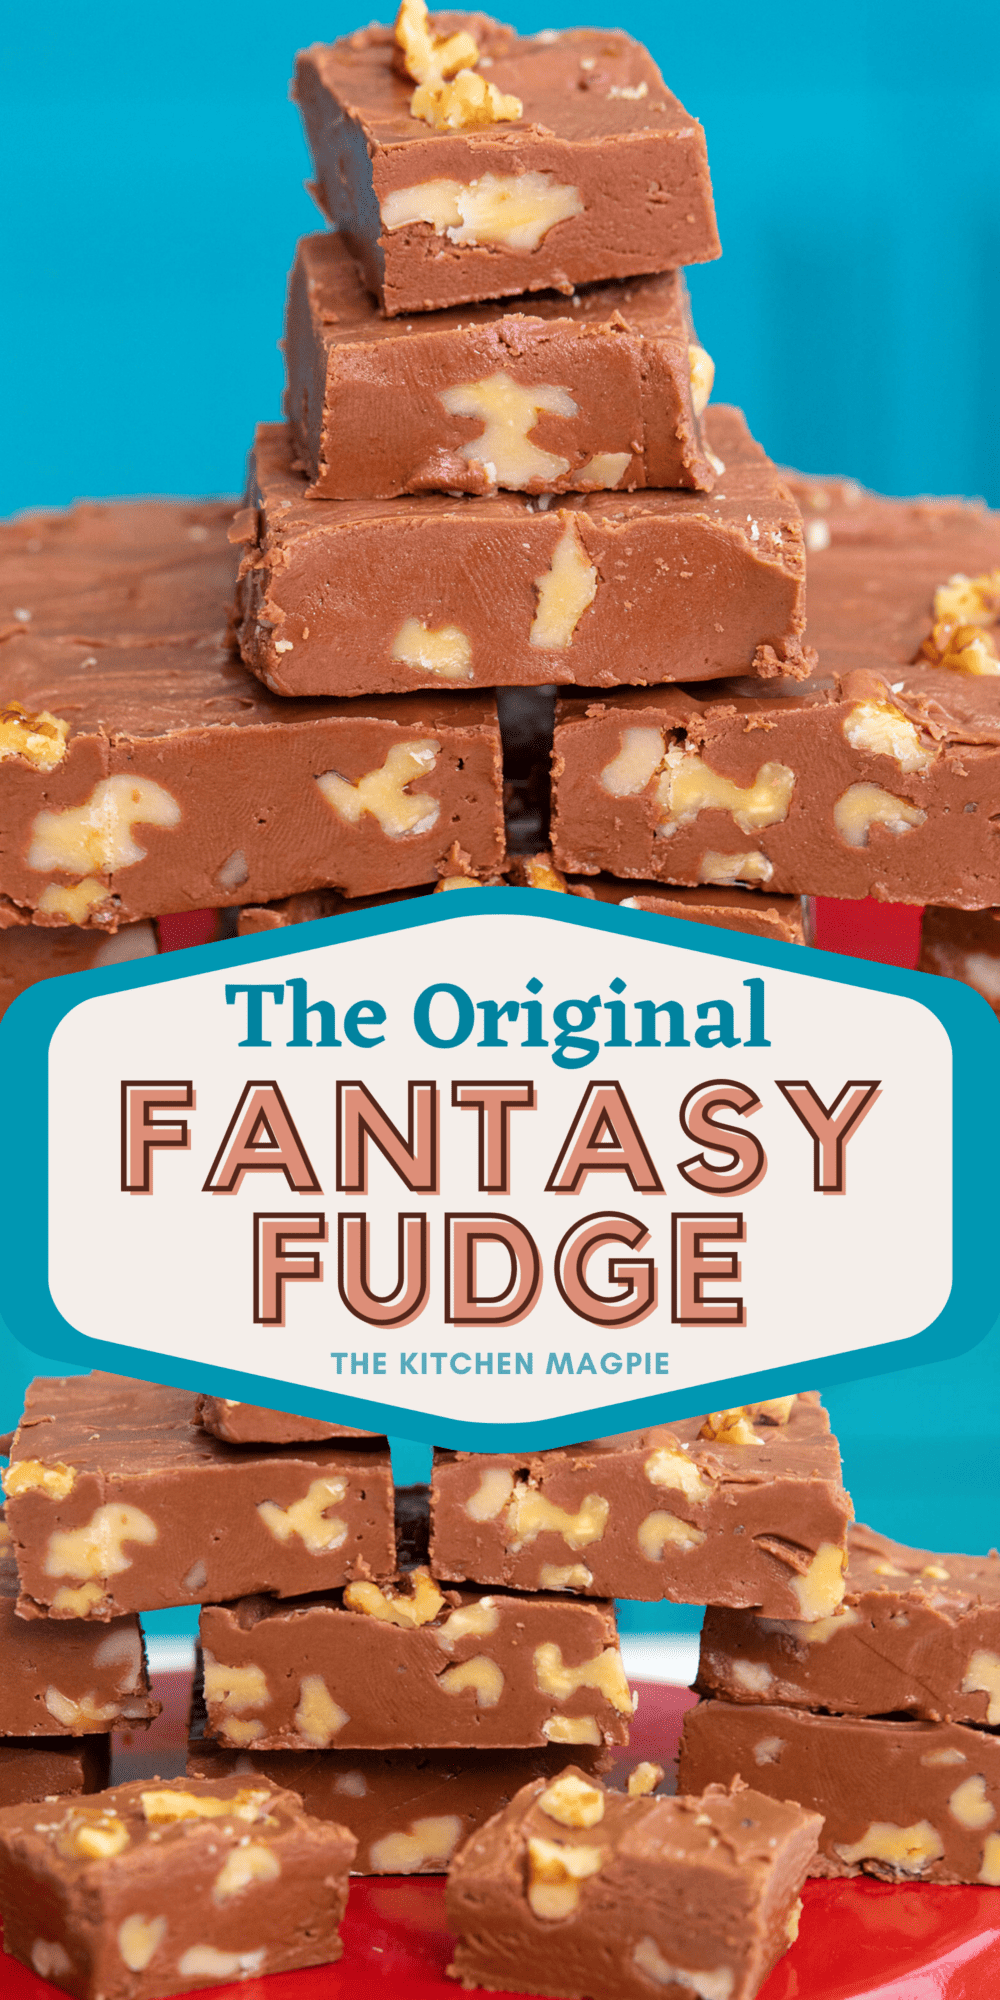 This fantasy fudge recipe is the original one found on the jar of marshmallow creme, but you can make it with miniature marshmallows as well!